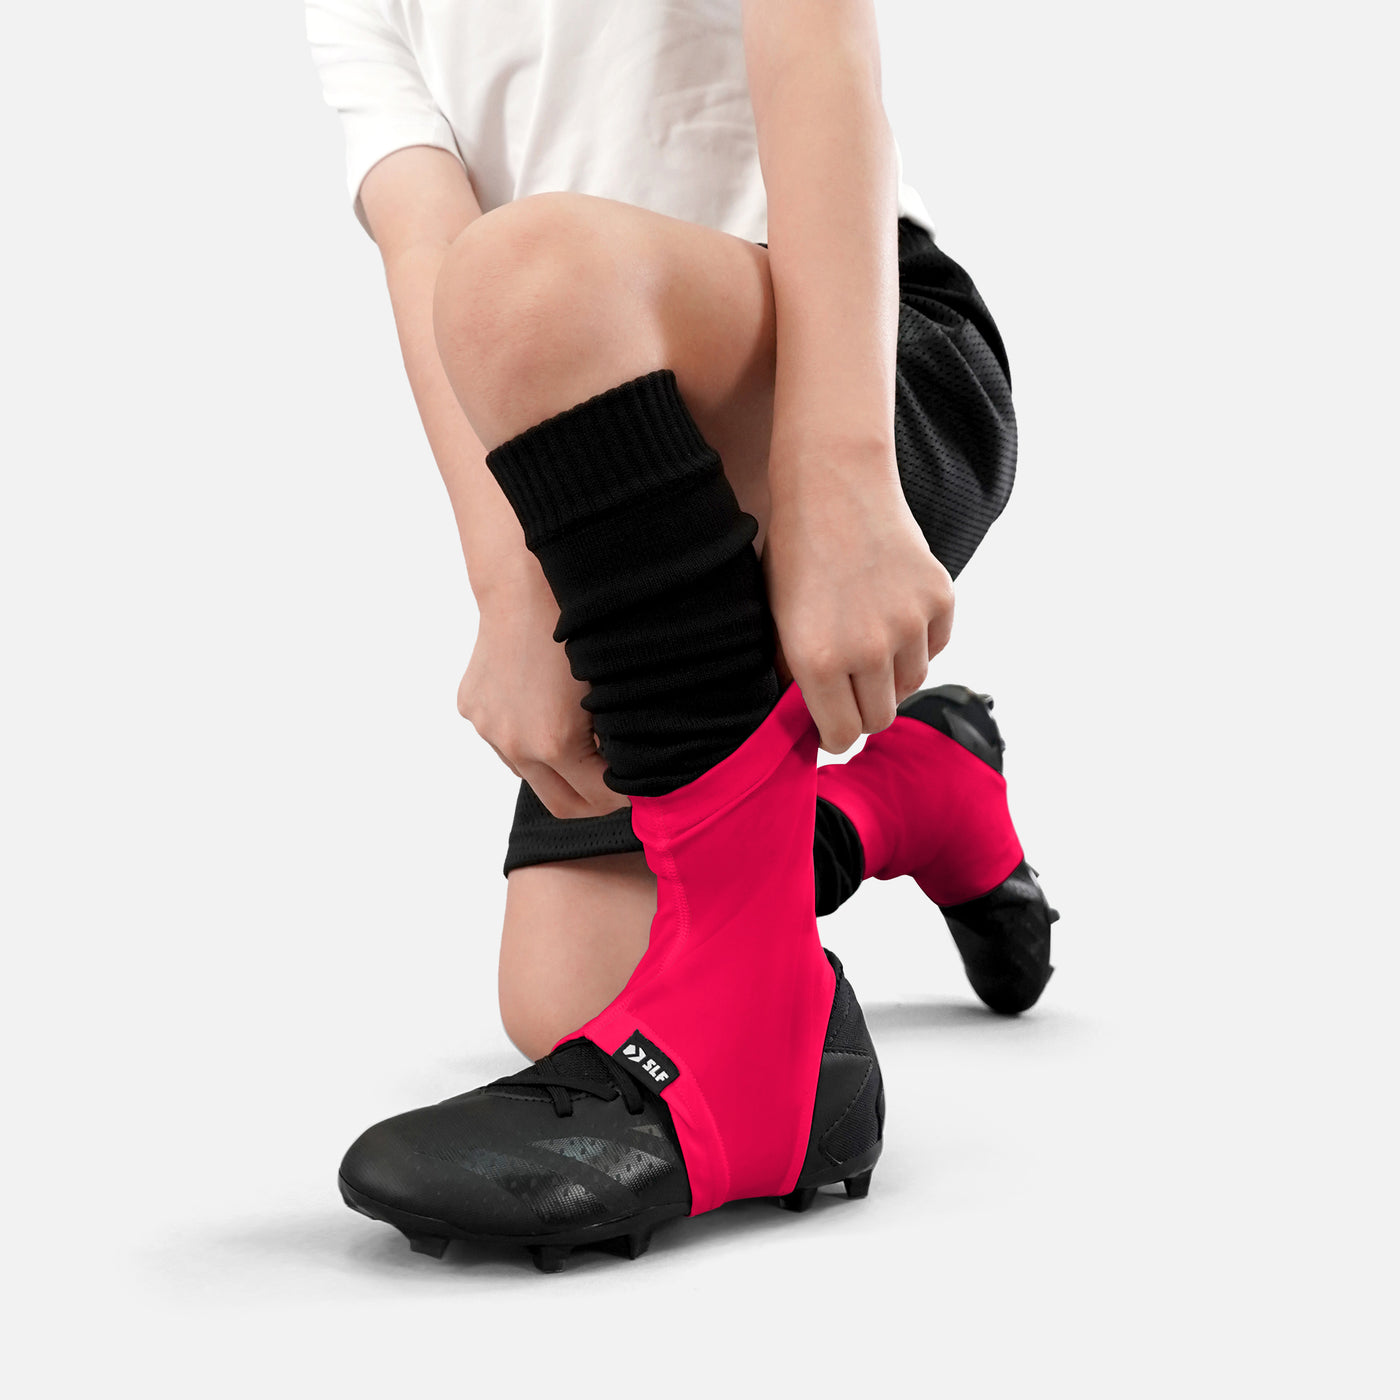 Hue Pink Kids Spats / Cleat Covers